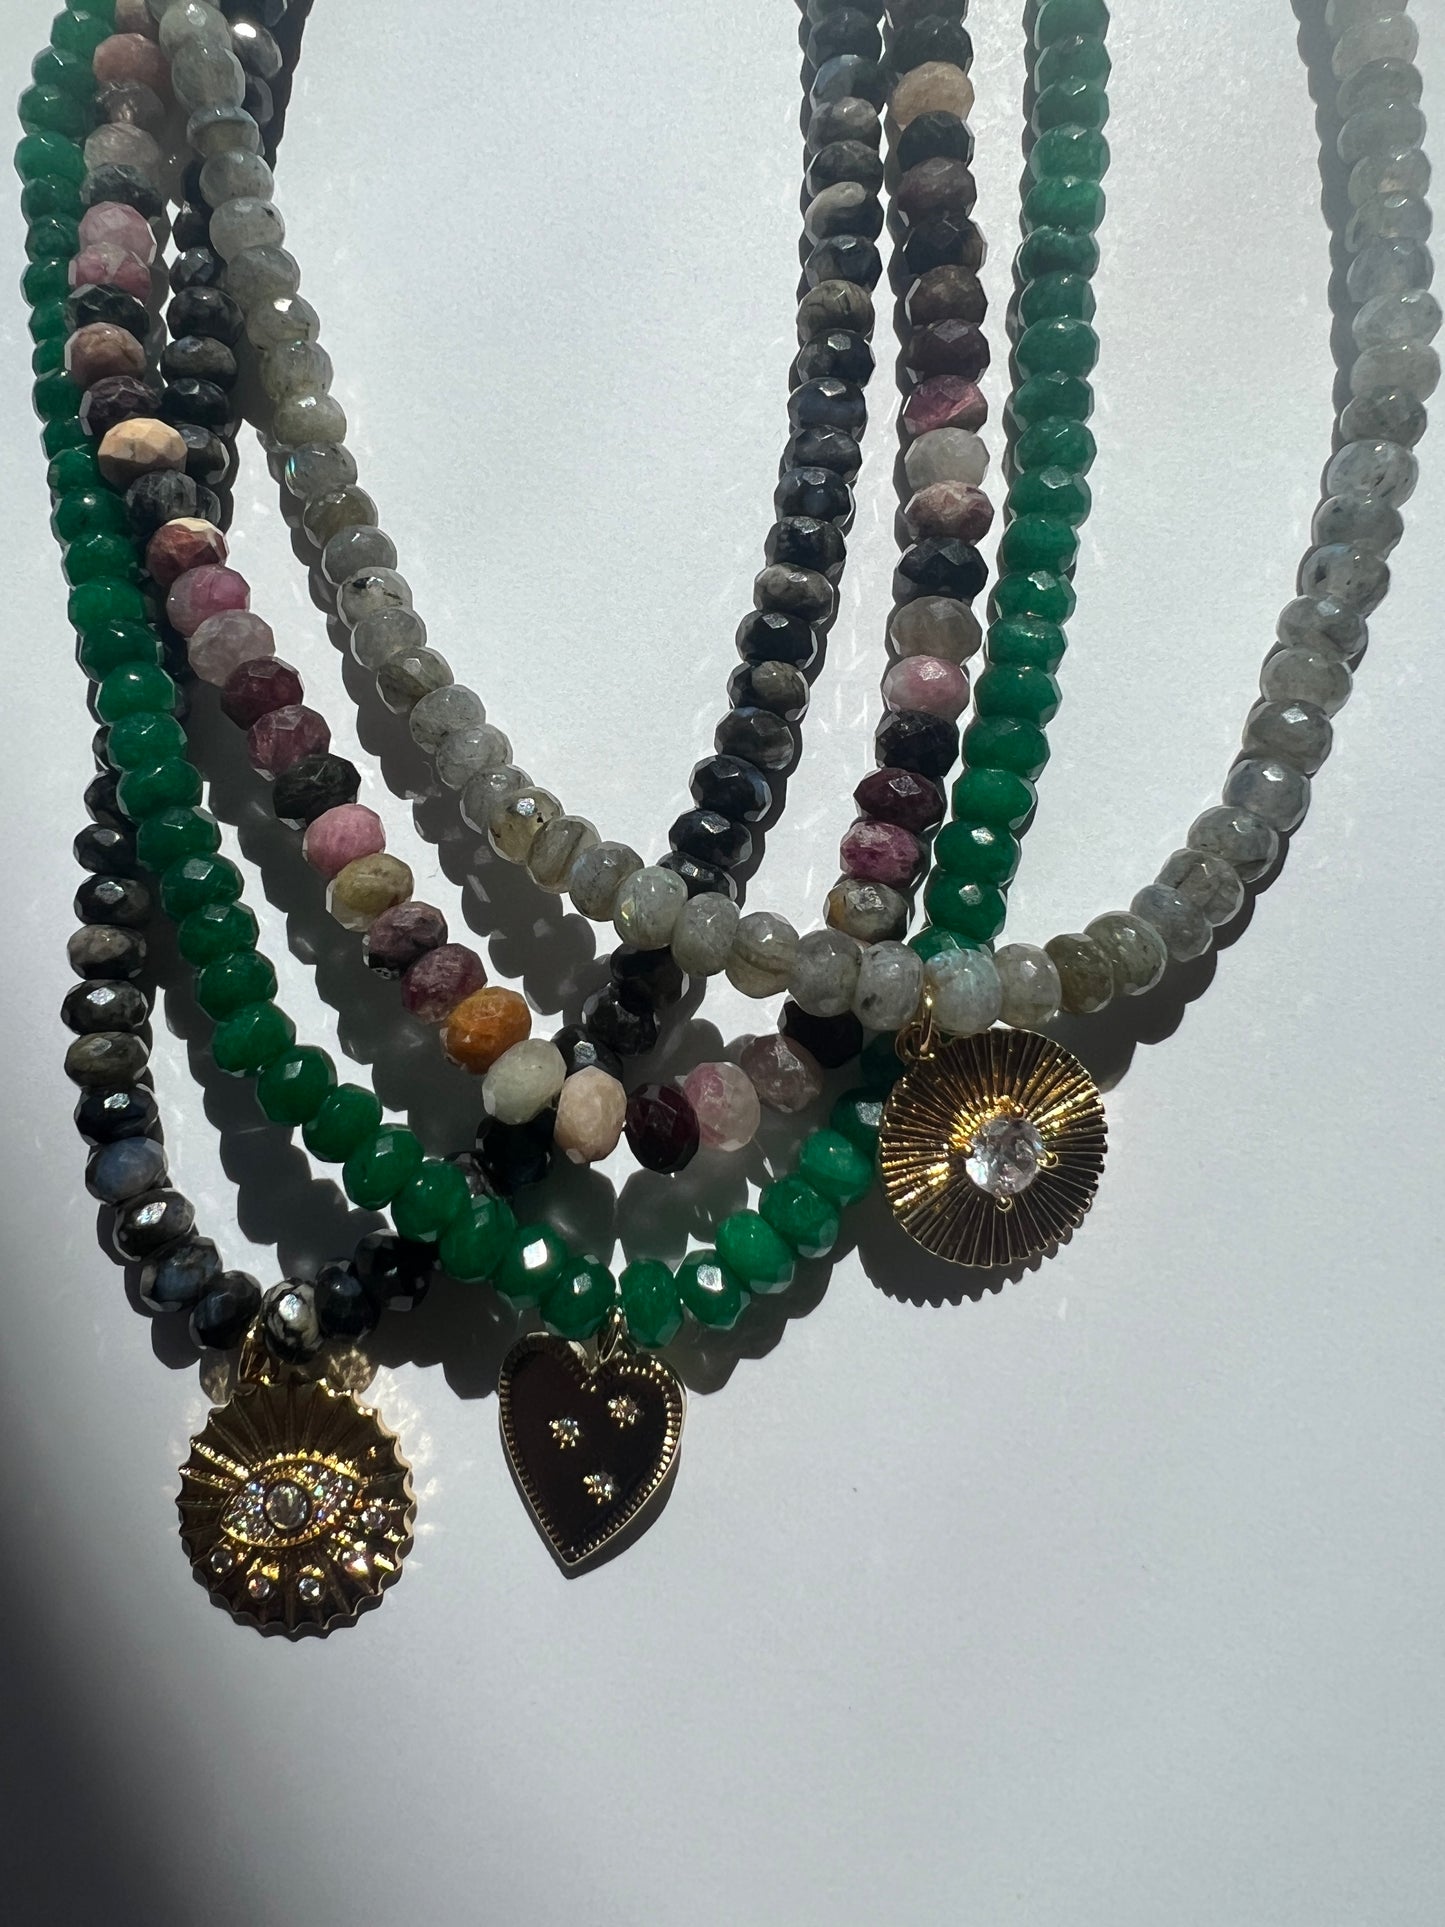 The SoHo Necklace with Charm - Green Jade Gemstone Stretch Necklace